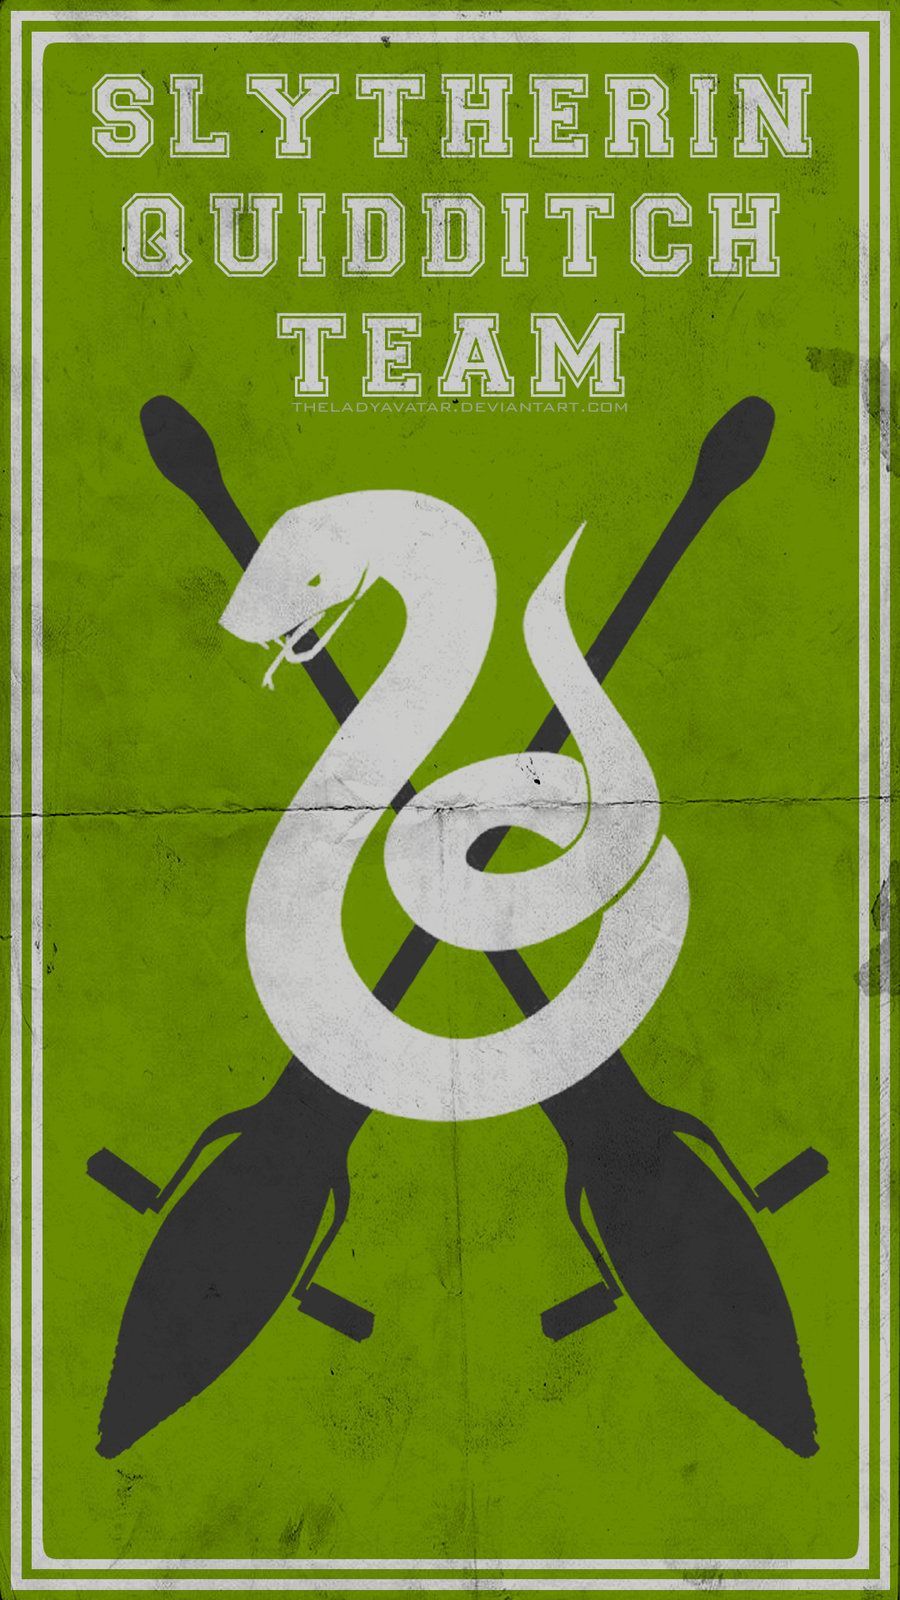 Slytherin Quidditch iPhone Wallpaper. Harry potter, Harry potter